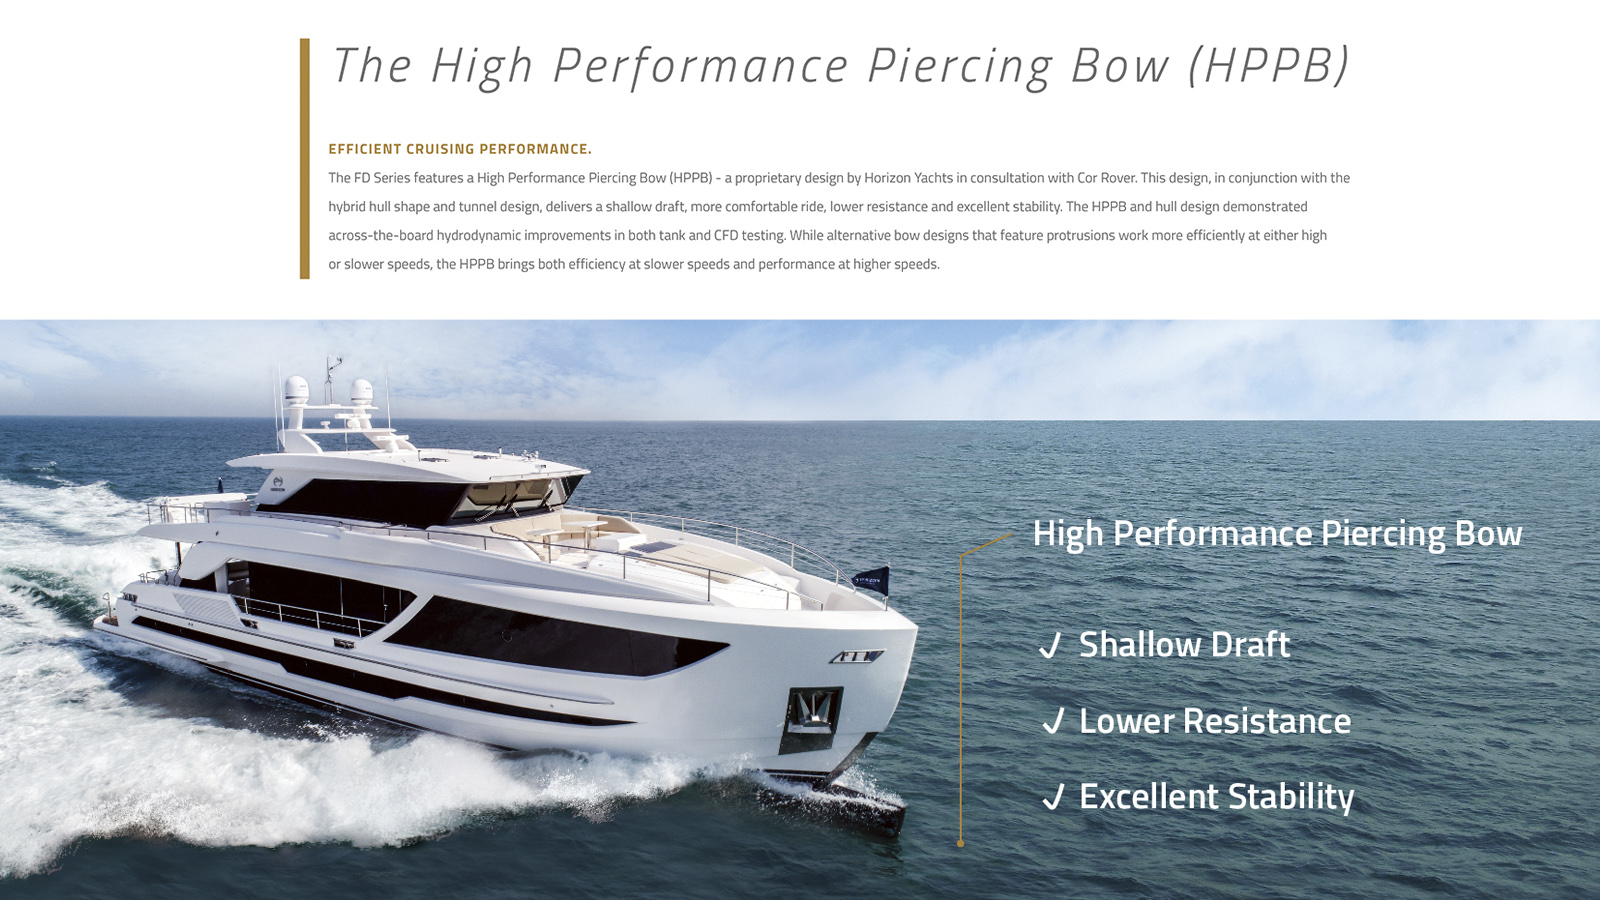 High Performance Piercing Bow